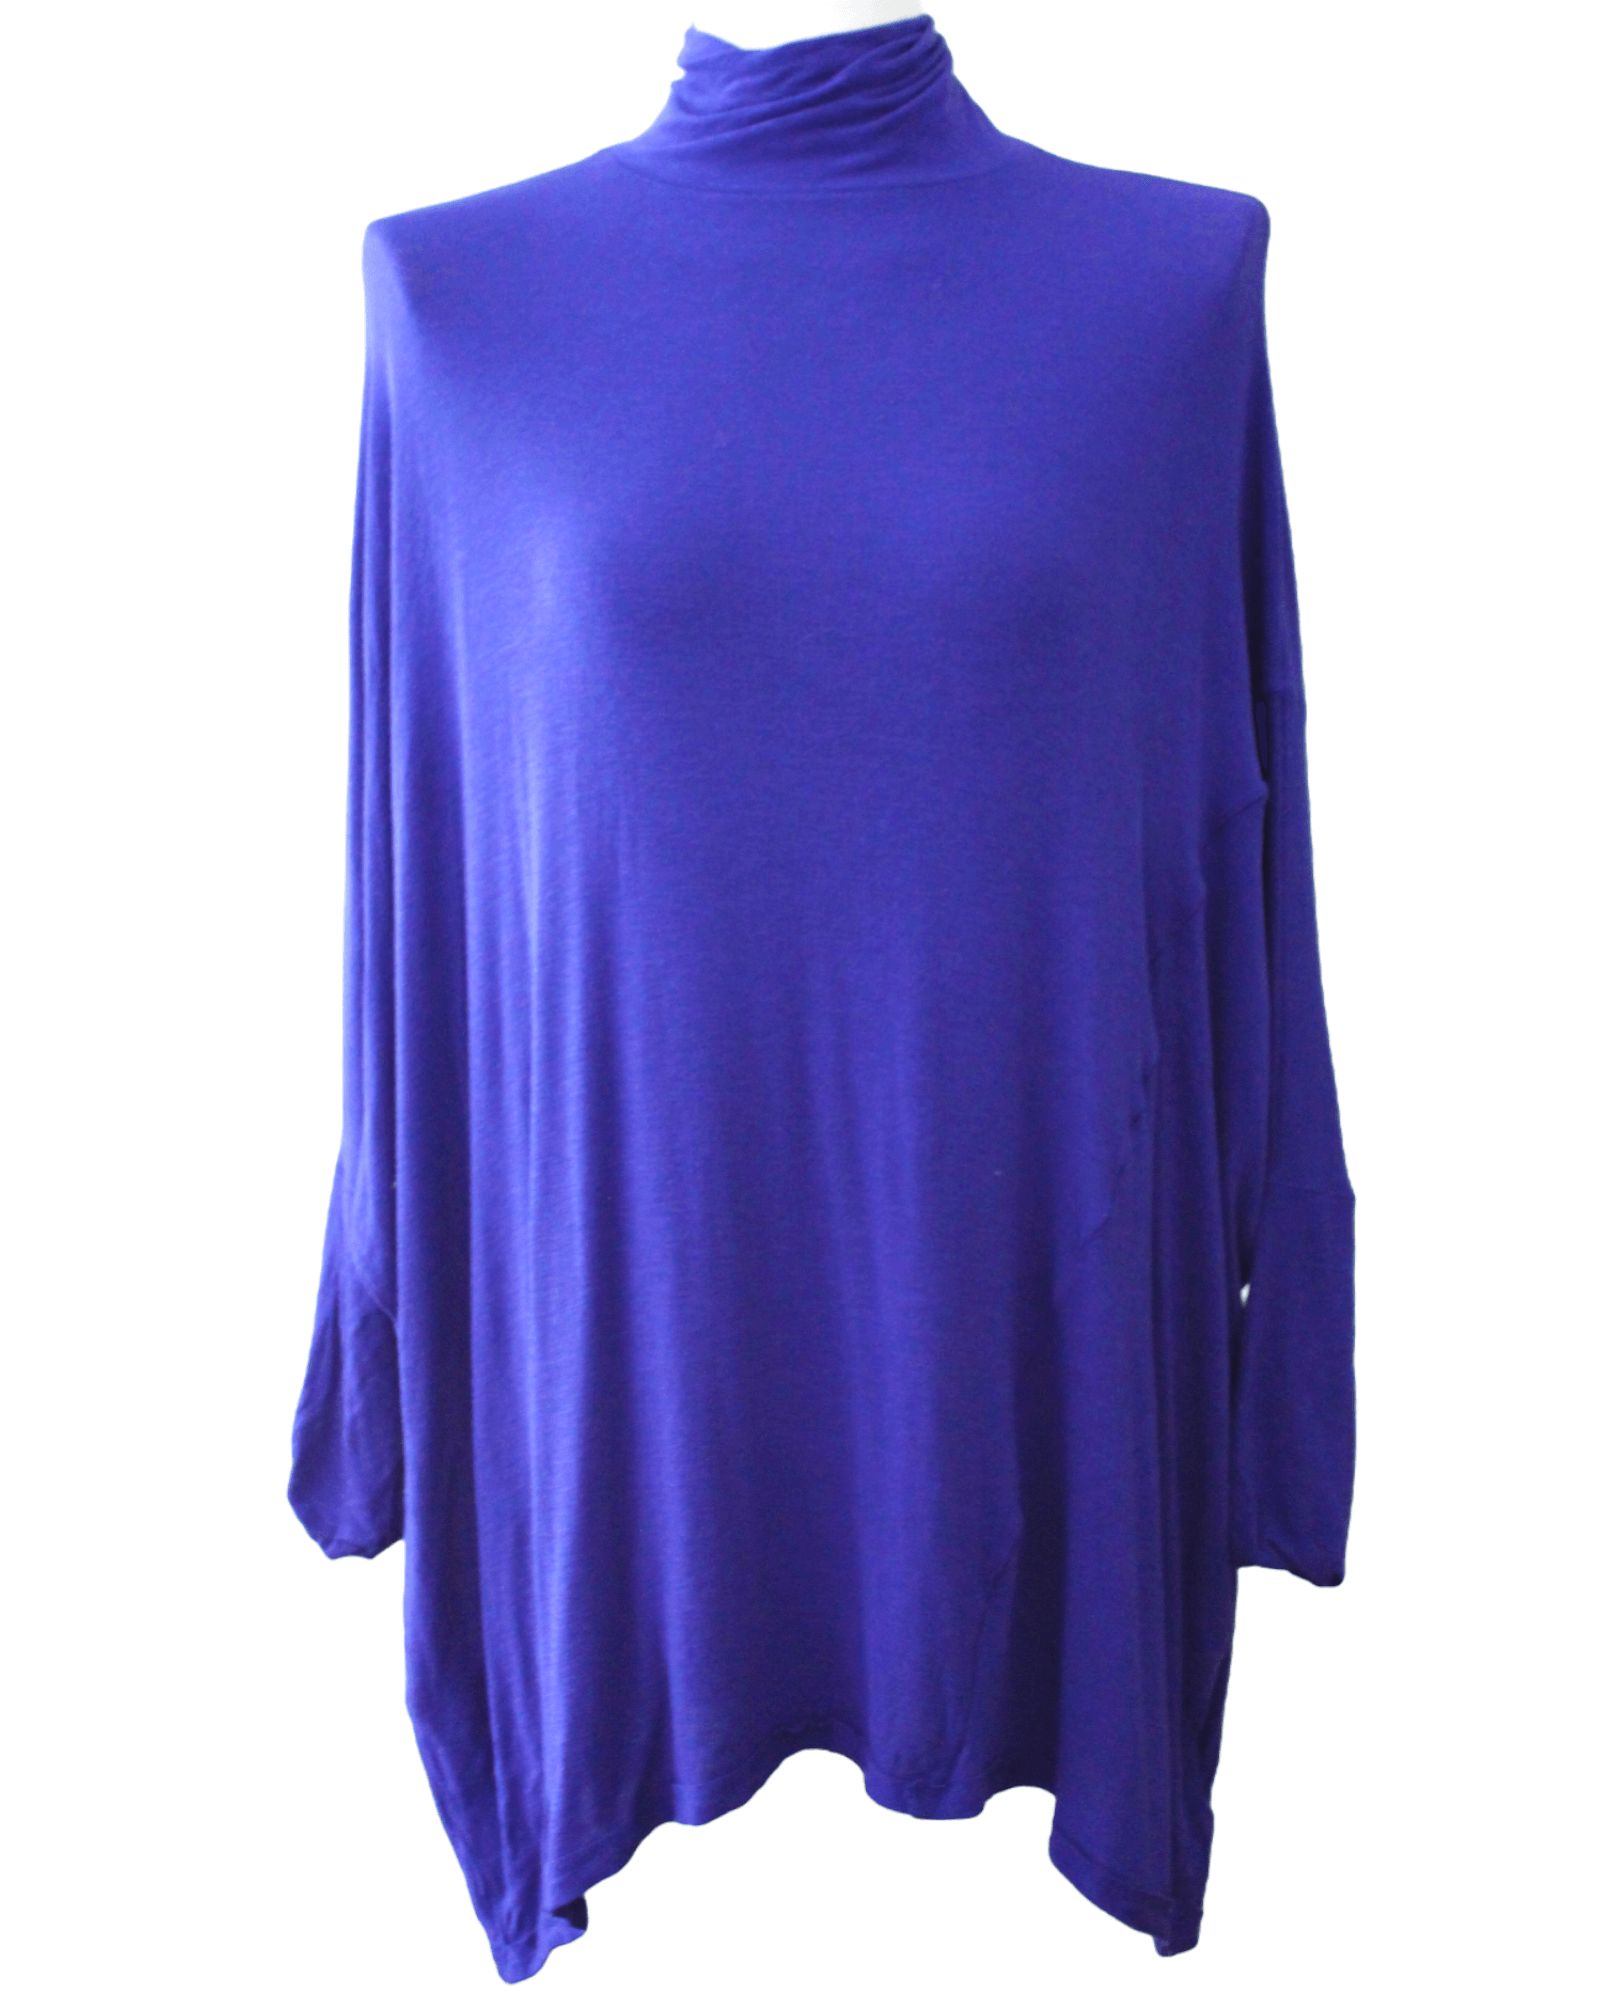 Cool Winter FREE PEOPLE blue pullover sweater